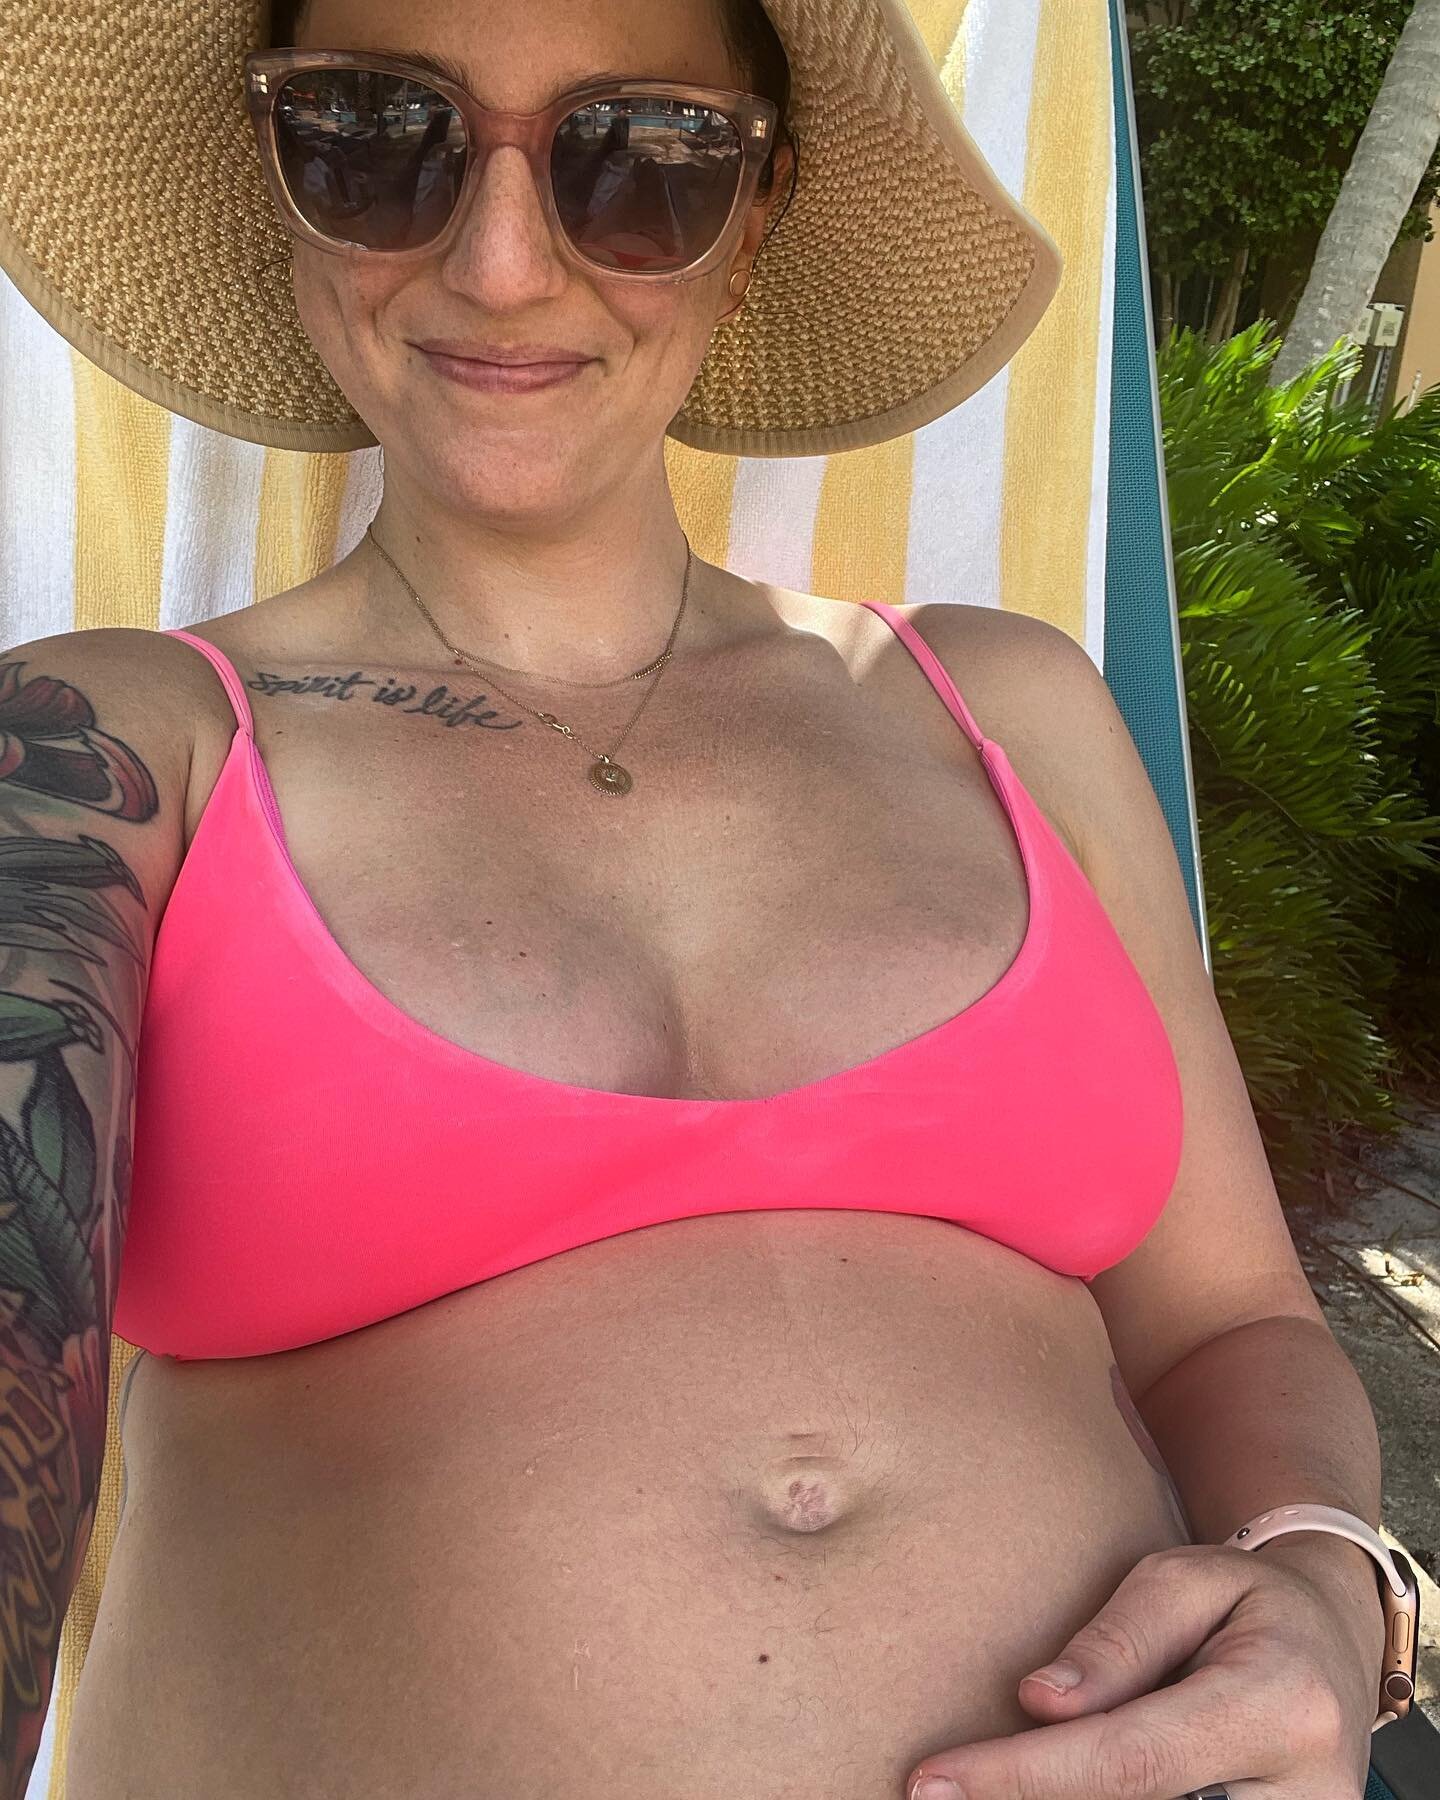 Me and the bump are OOO drinking virgin pina coladas in key west. 

Regularly scheduled programming will be back next week.

Forever thankful for a life and a partner that allow me to rest and truly soak up this sweet season.